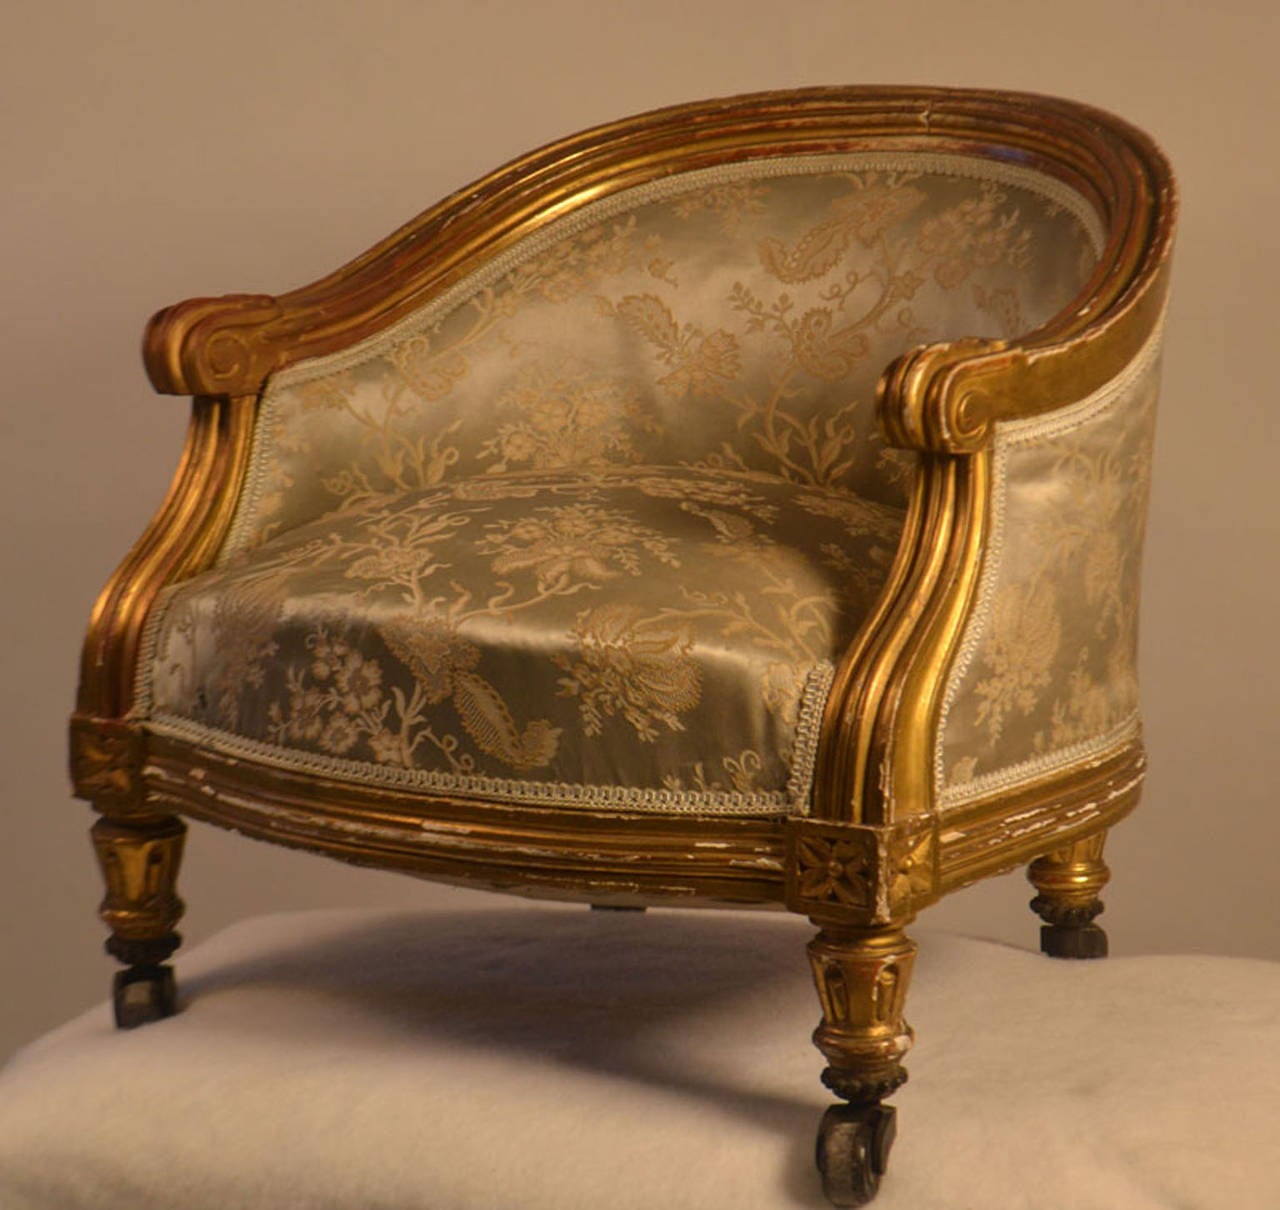 Small giltwood Louis XVI style footstool.